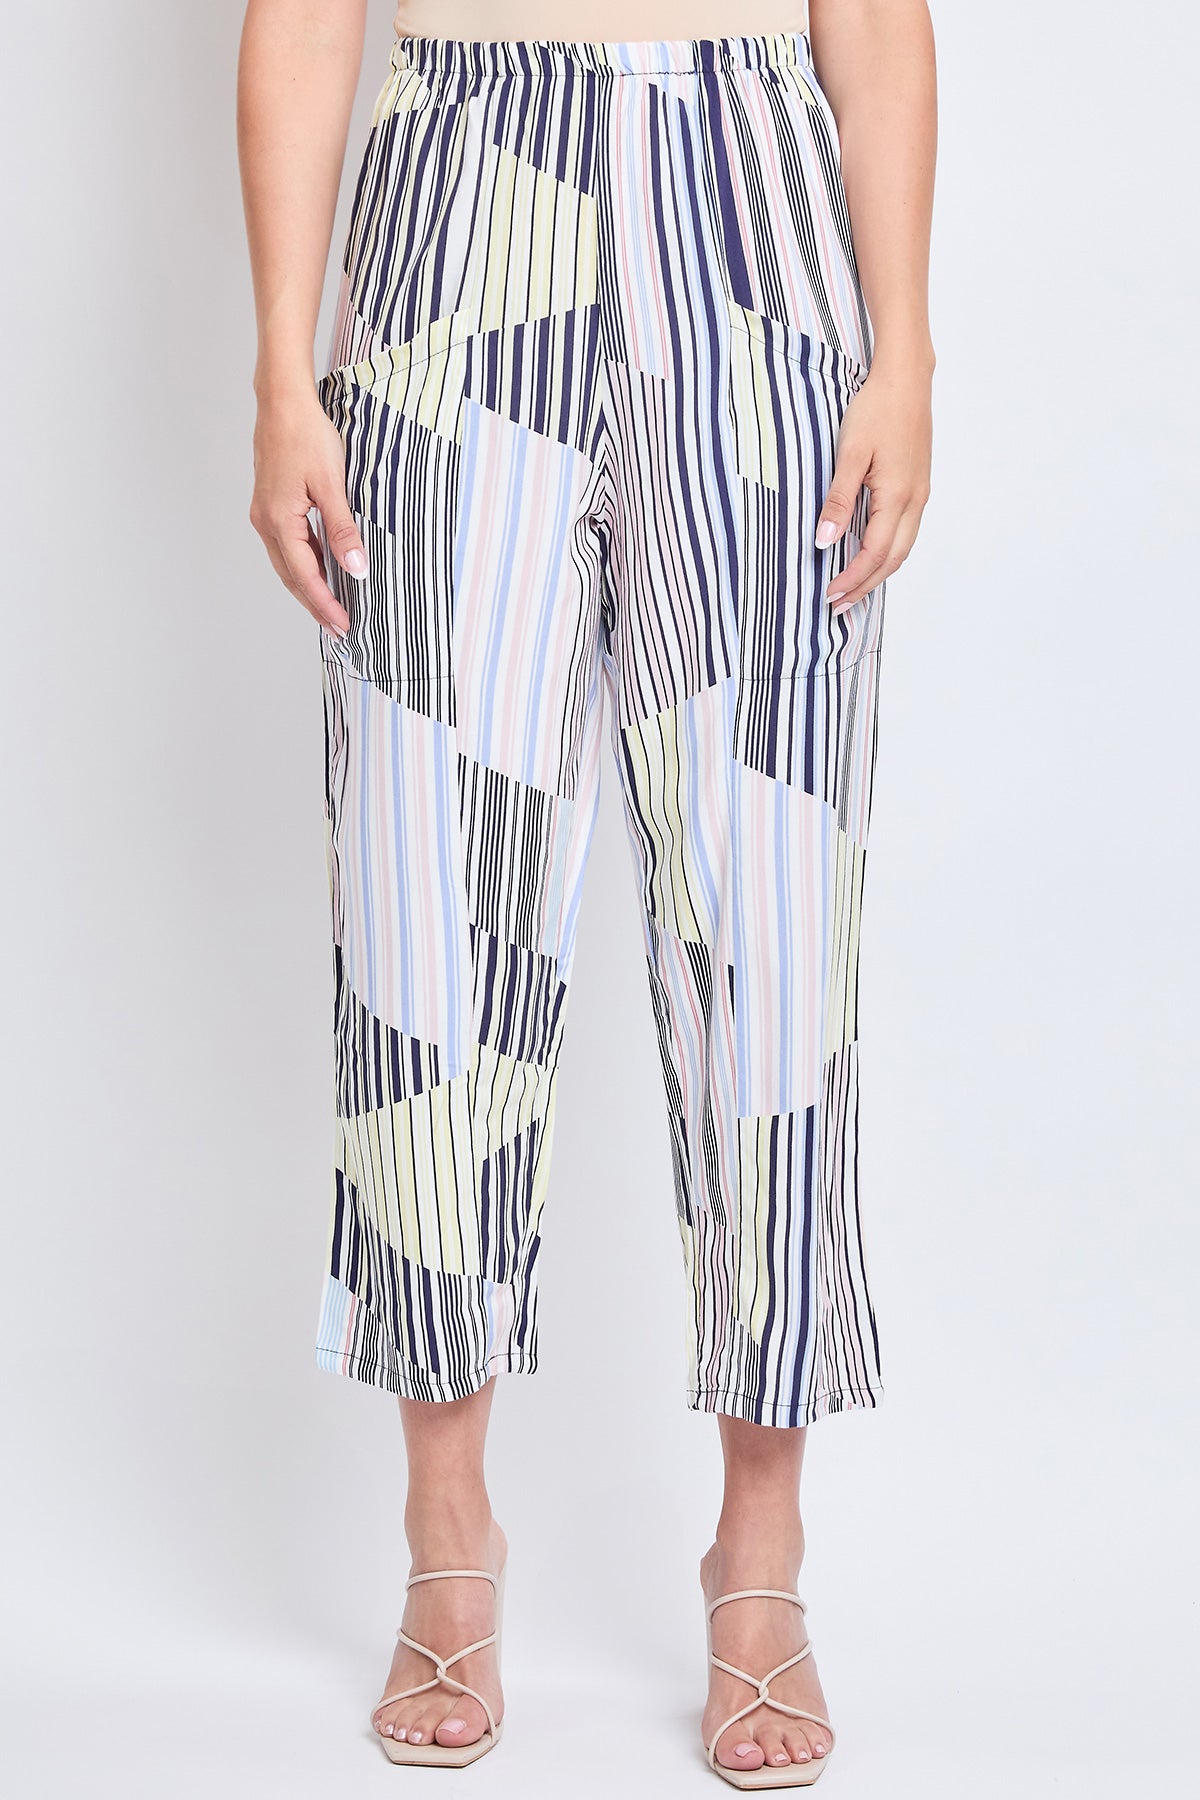 Missy Pull-On Relaxed Rise Pant W/Tapered Leg 6 Pack